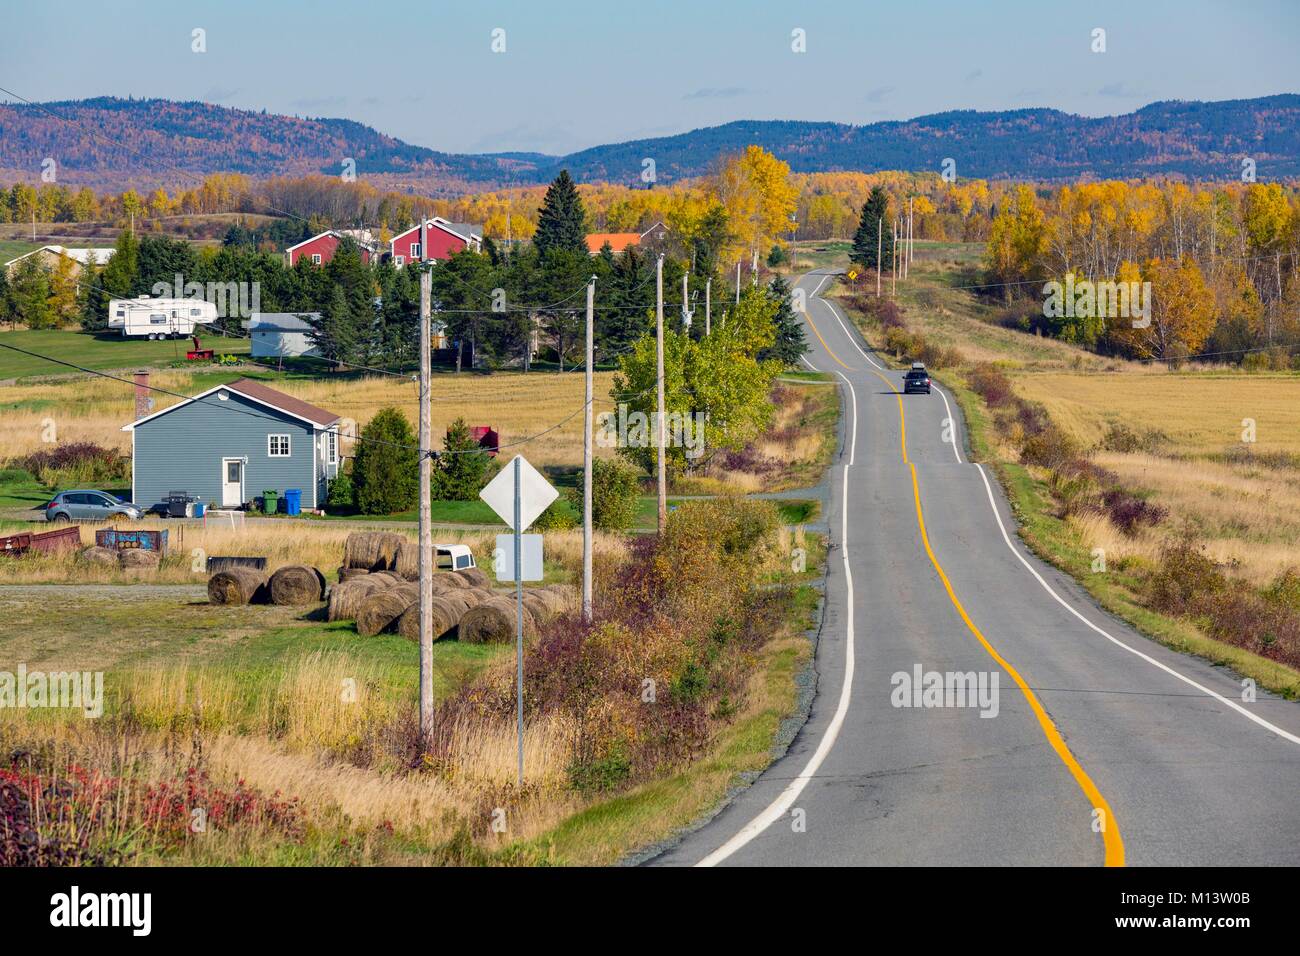 Canada, Province of Quebec, Abitibi-Témiscamingue Region, Rouyn-Noranda, on the road to Aiguebelle National Park Stock Photo